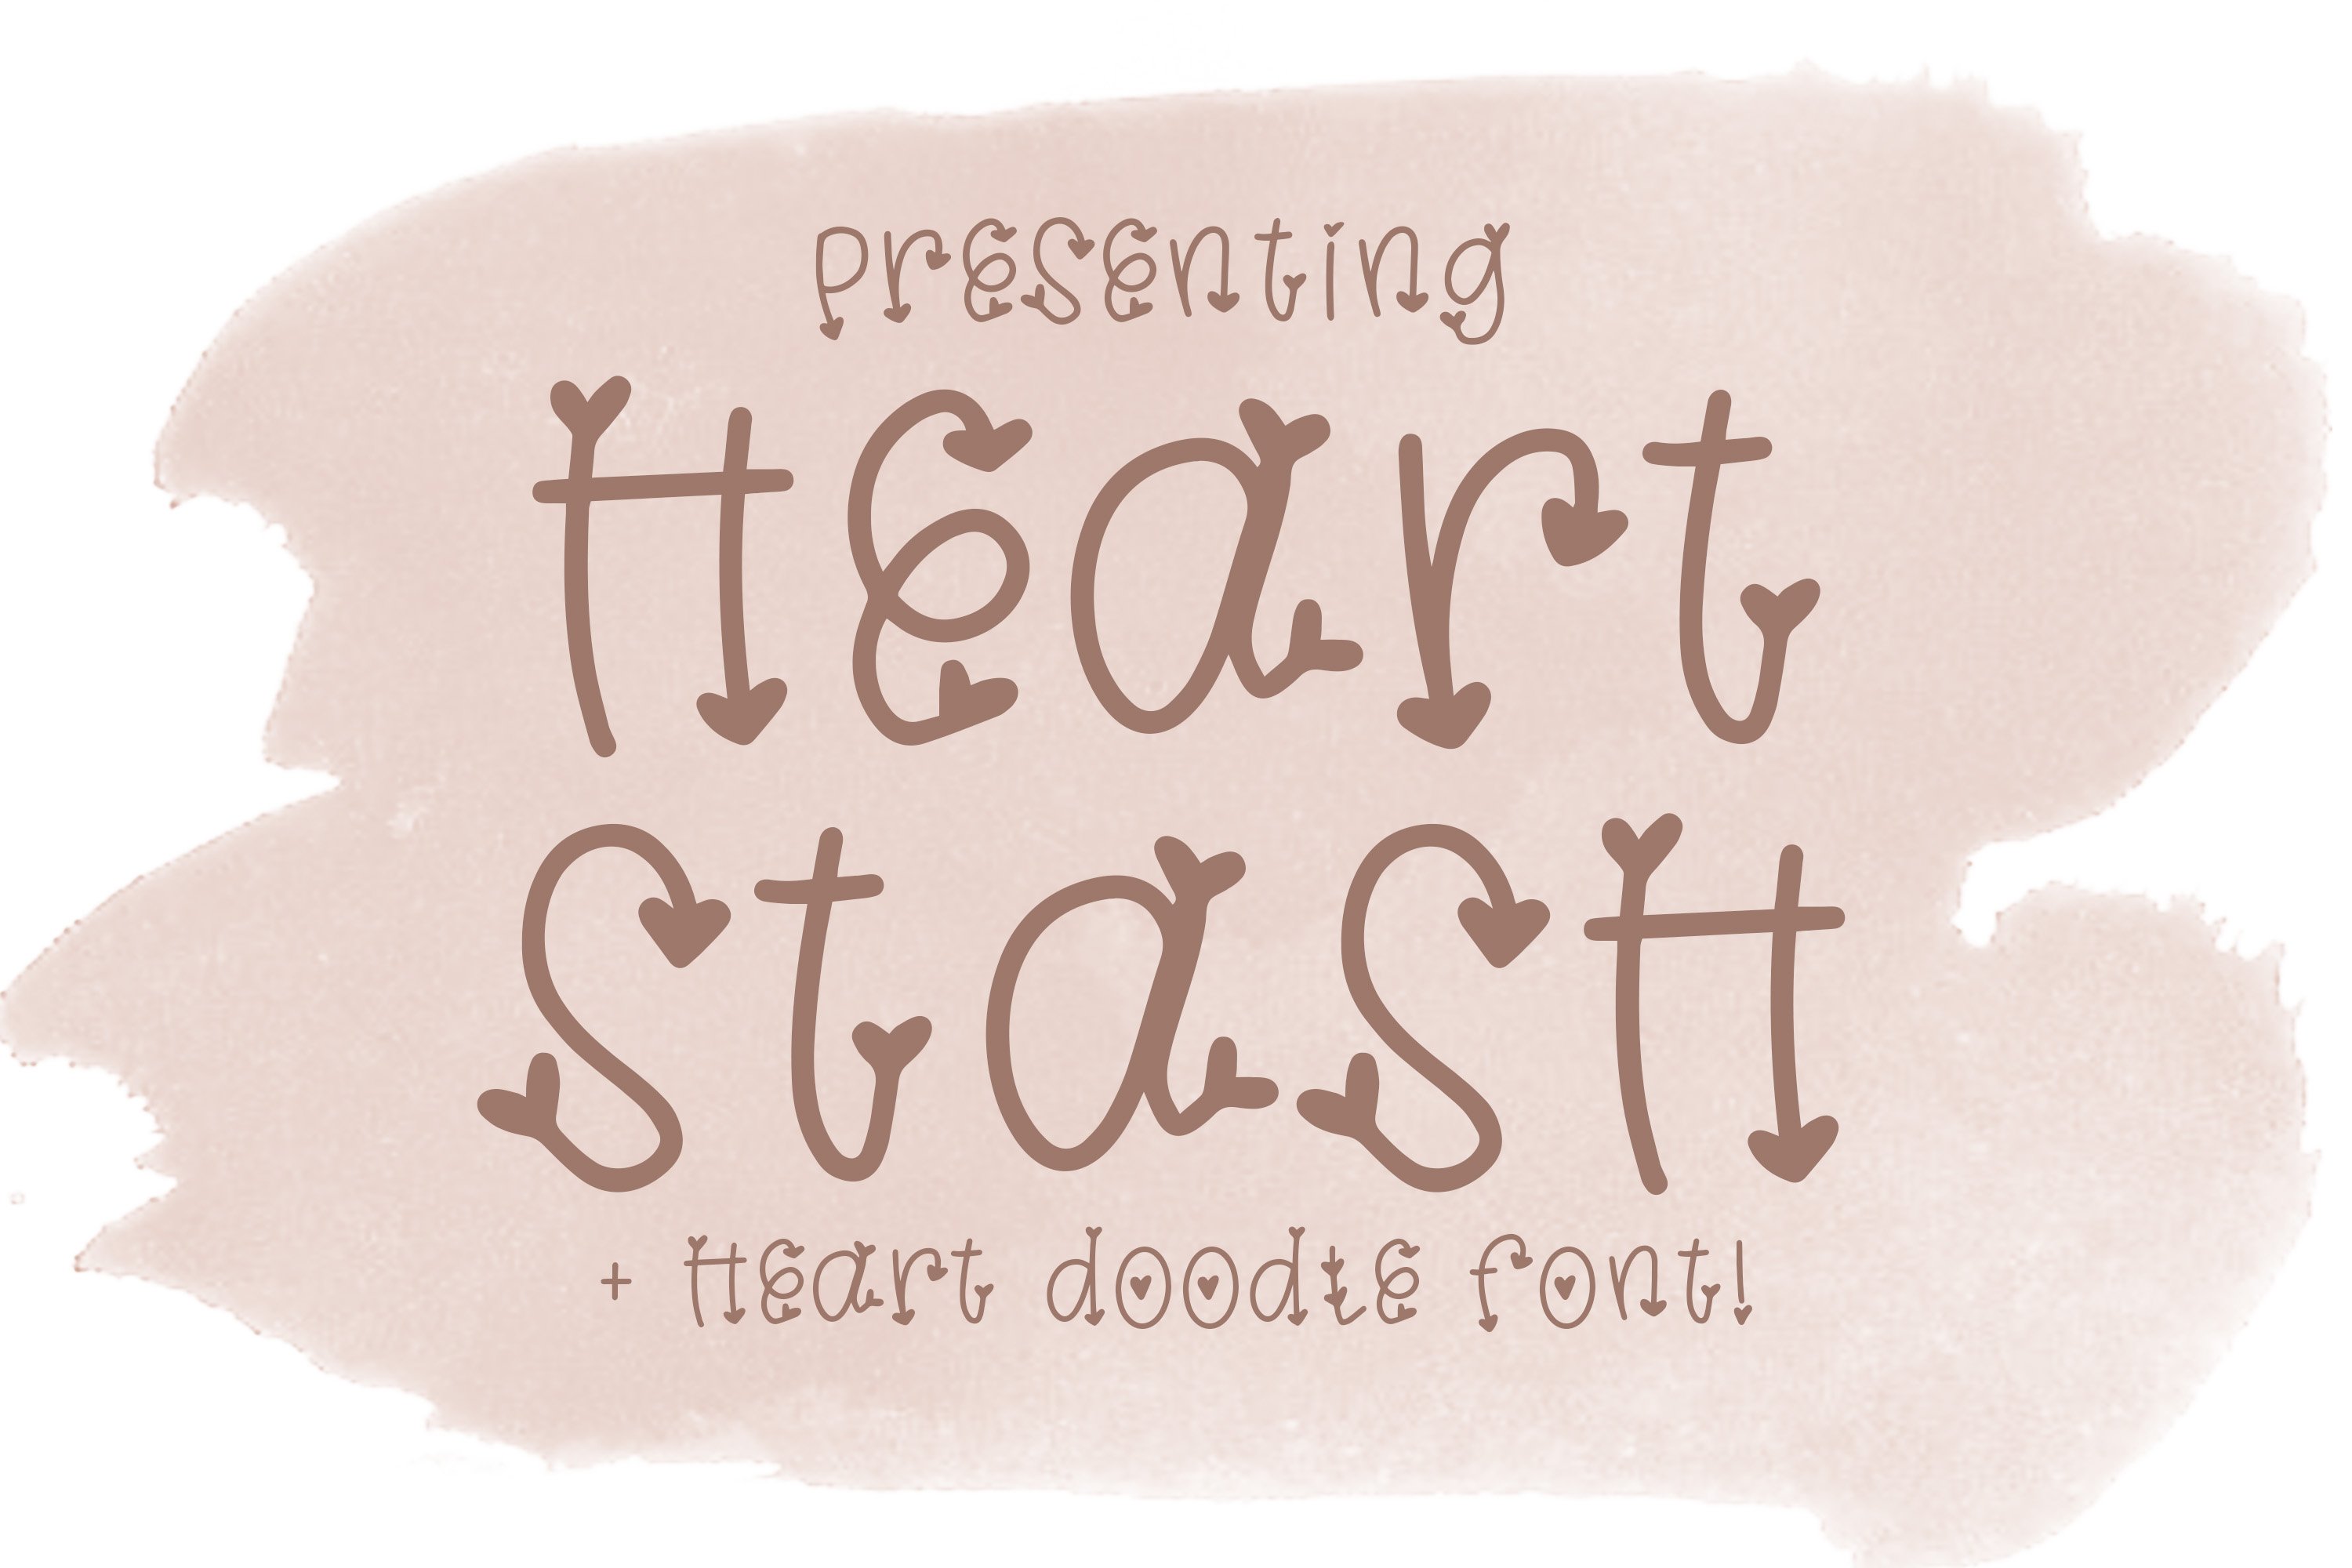 Heart Stash Font with Heart Doodles! cover image.